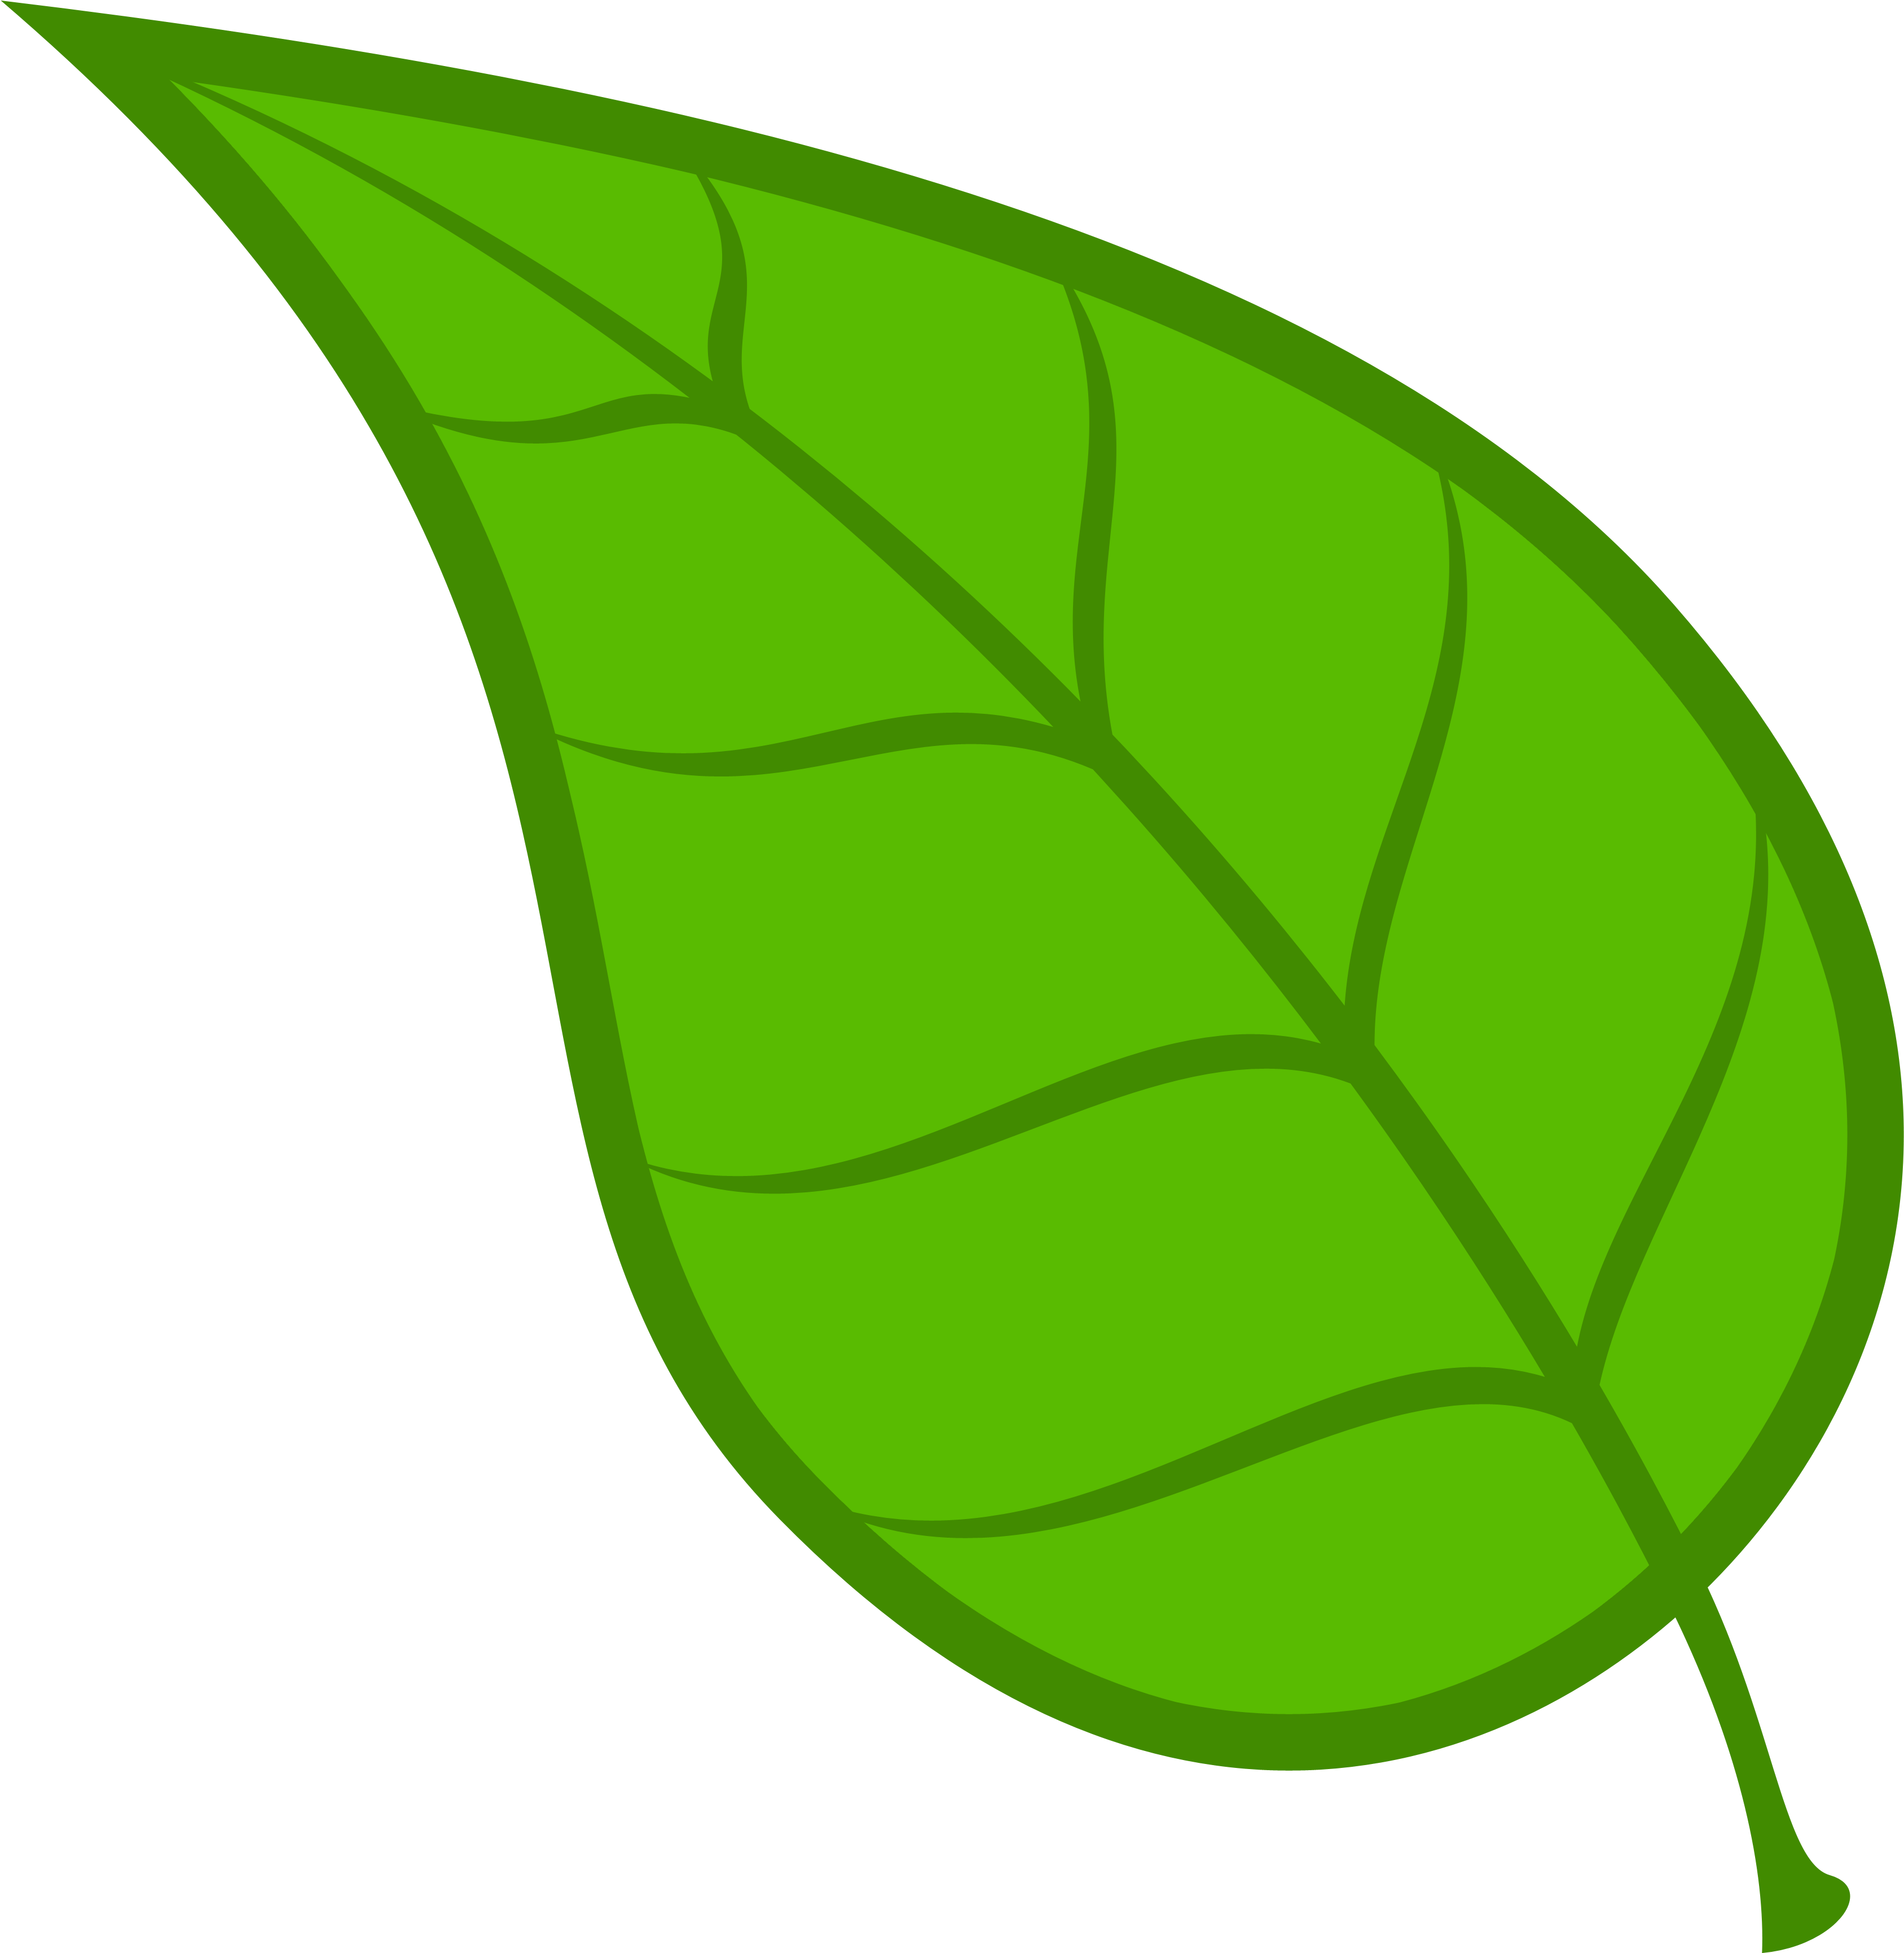 An image of a green leaf.